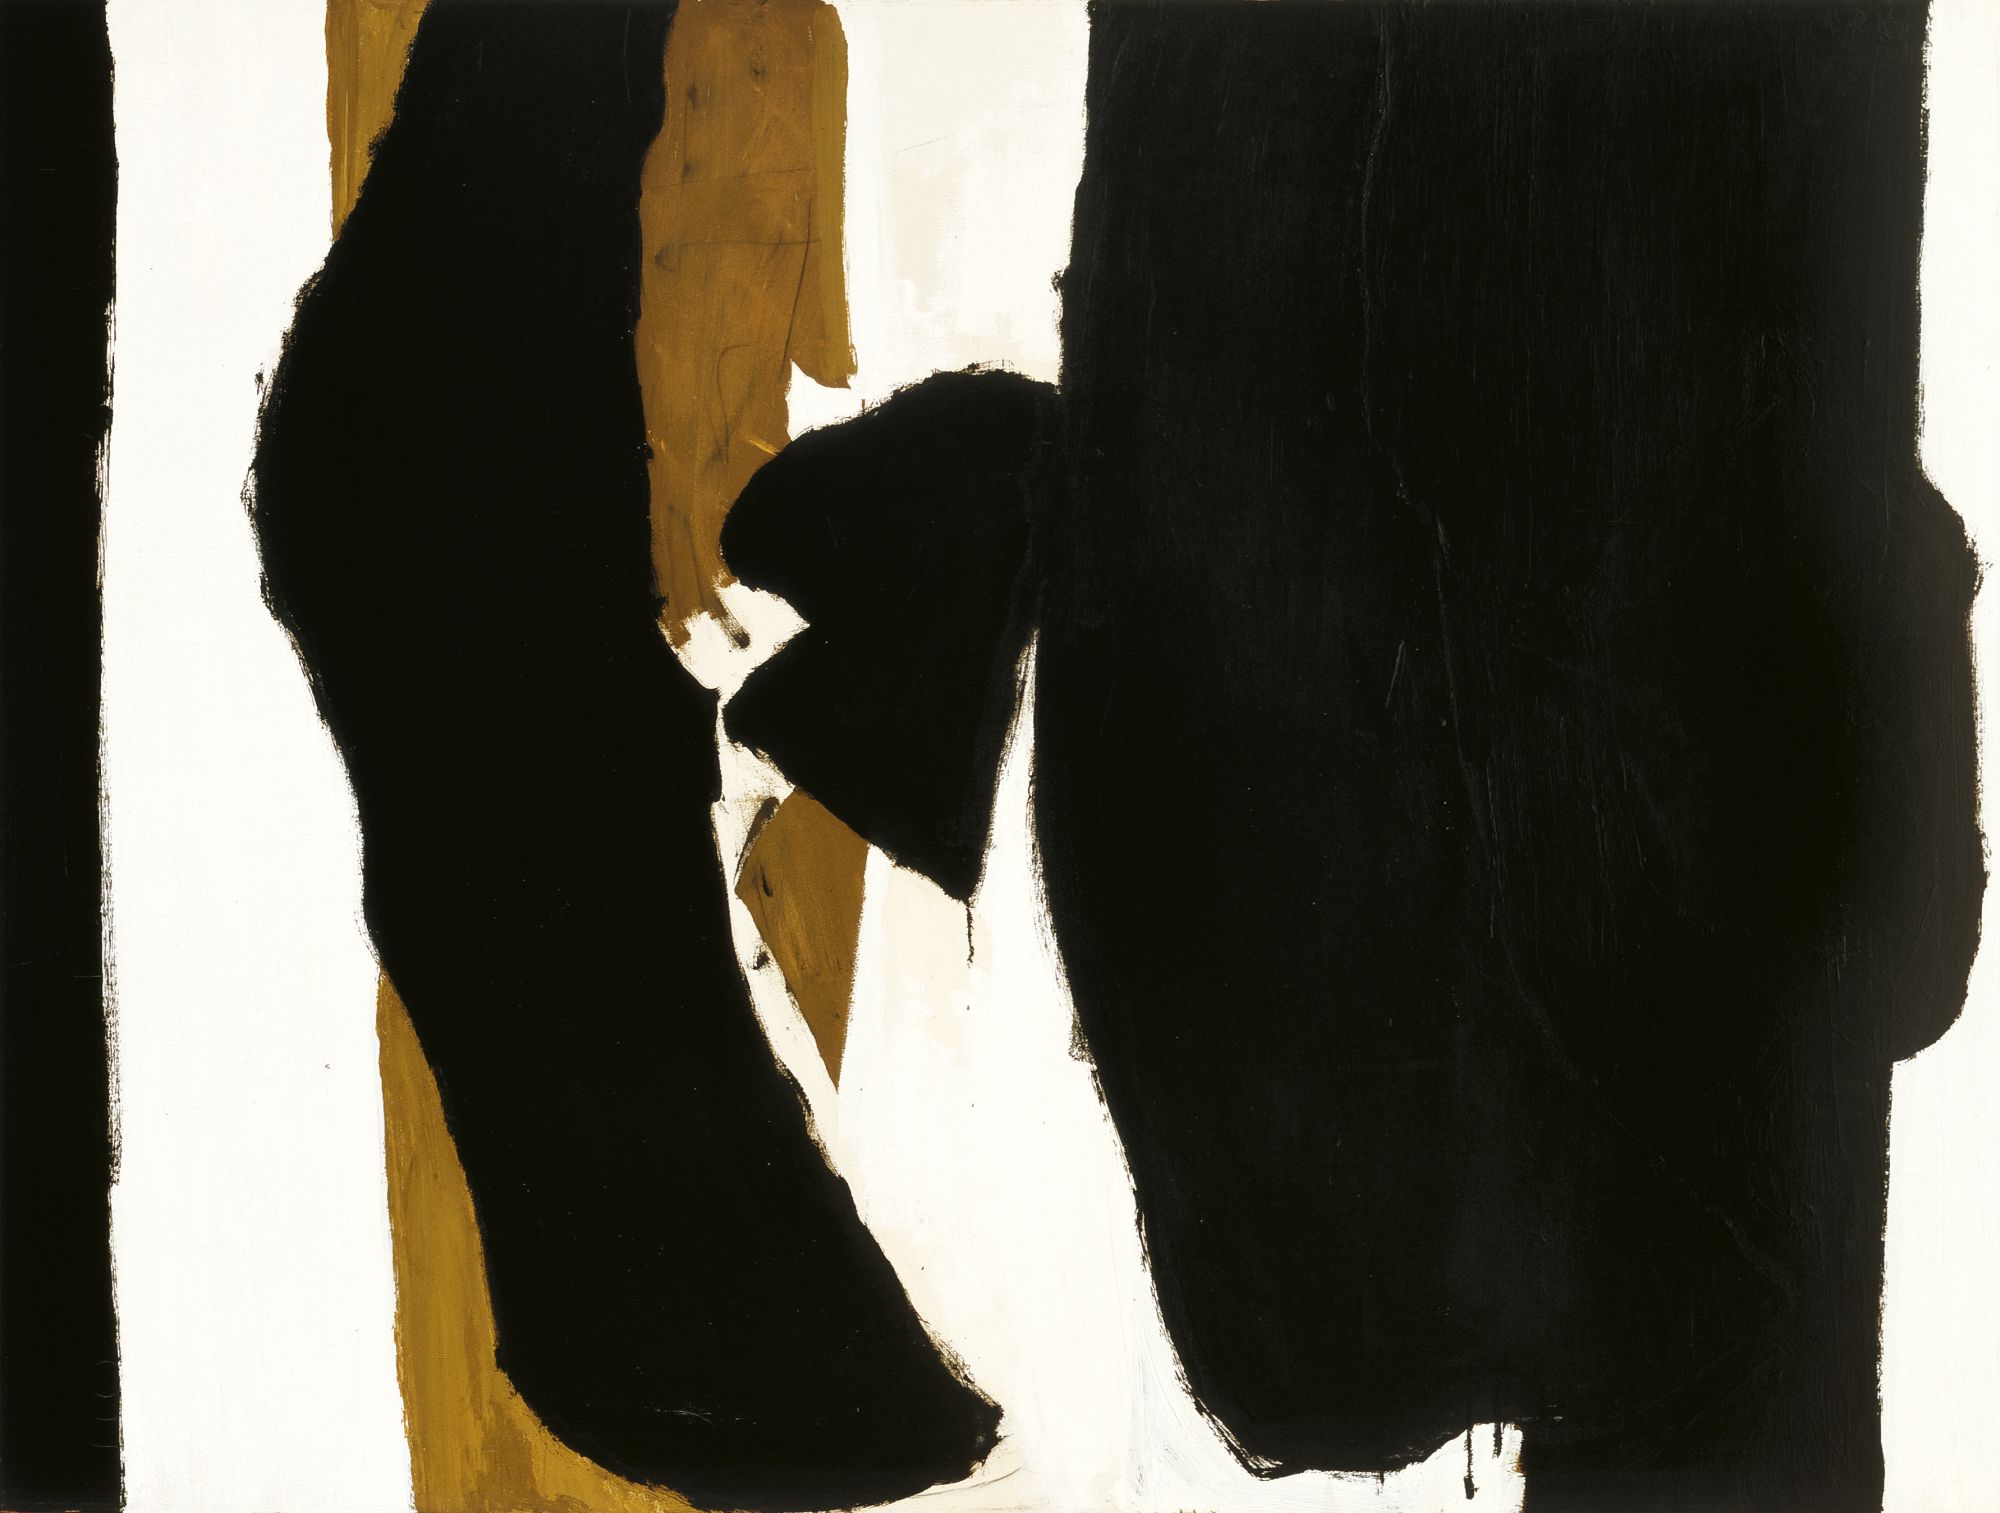 Wall Painting IV, 1954. Oil and charcoal on canvas, 54 1/8 x 72 1/8 inches (137.5 x 183.2 cm)